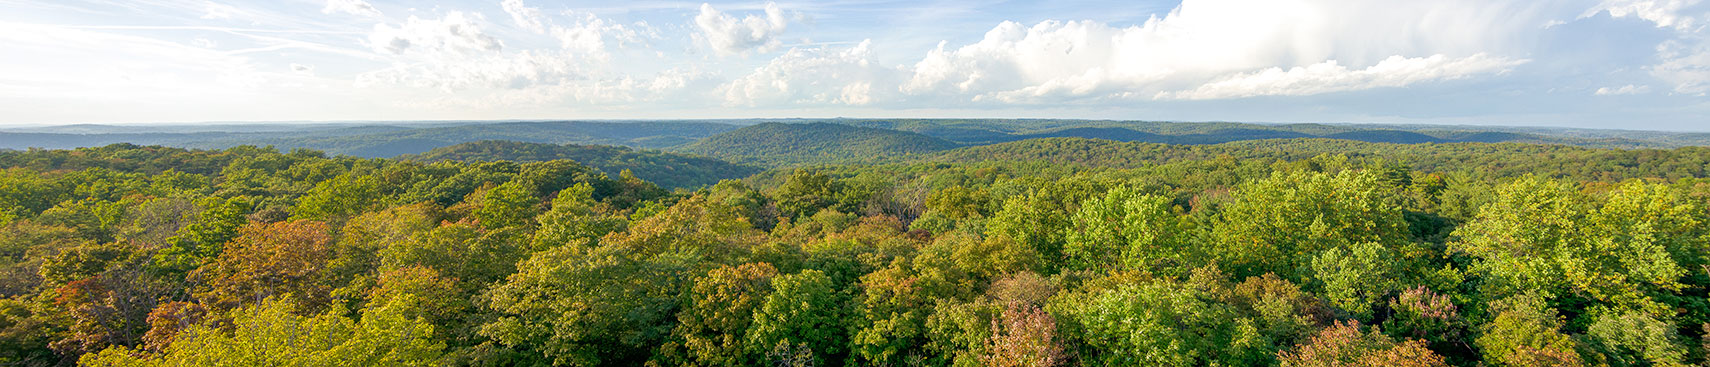 Harrison-Crawford State Forest, Indiana